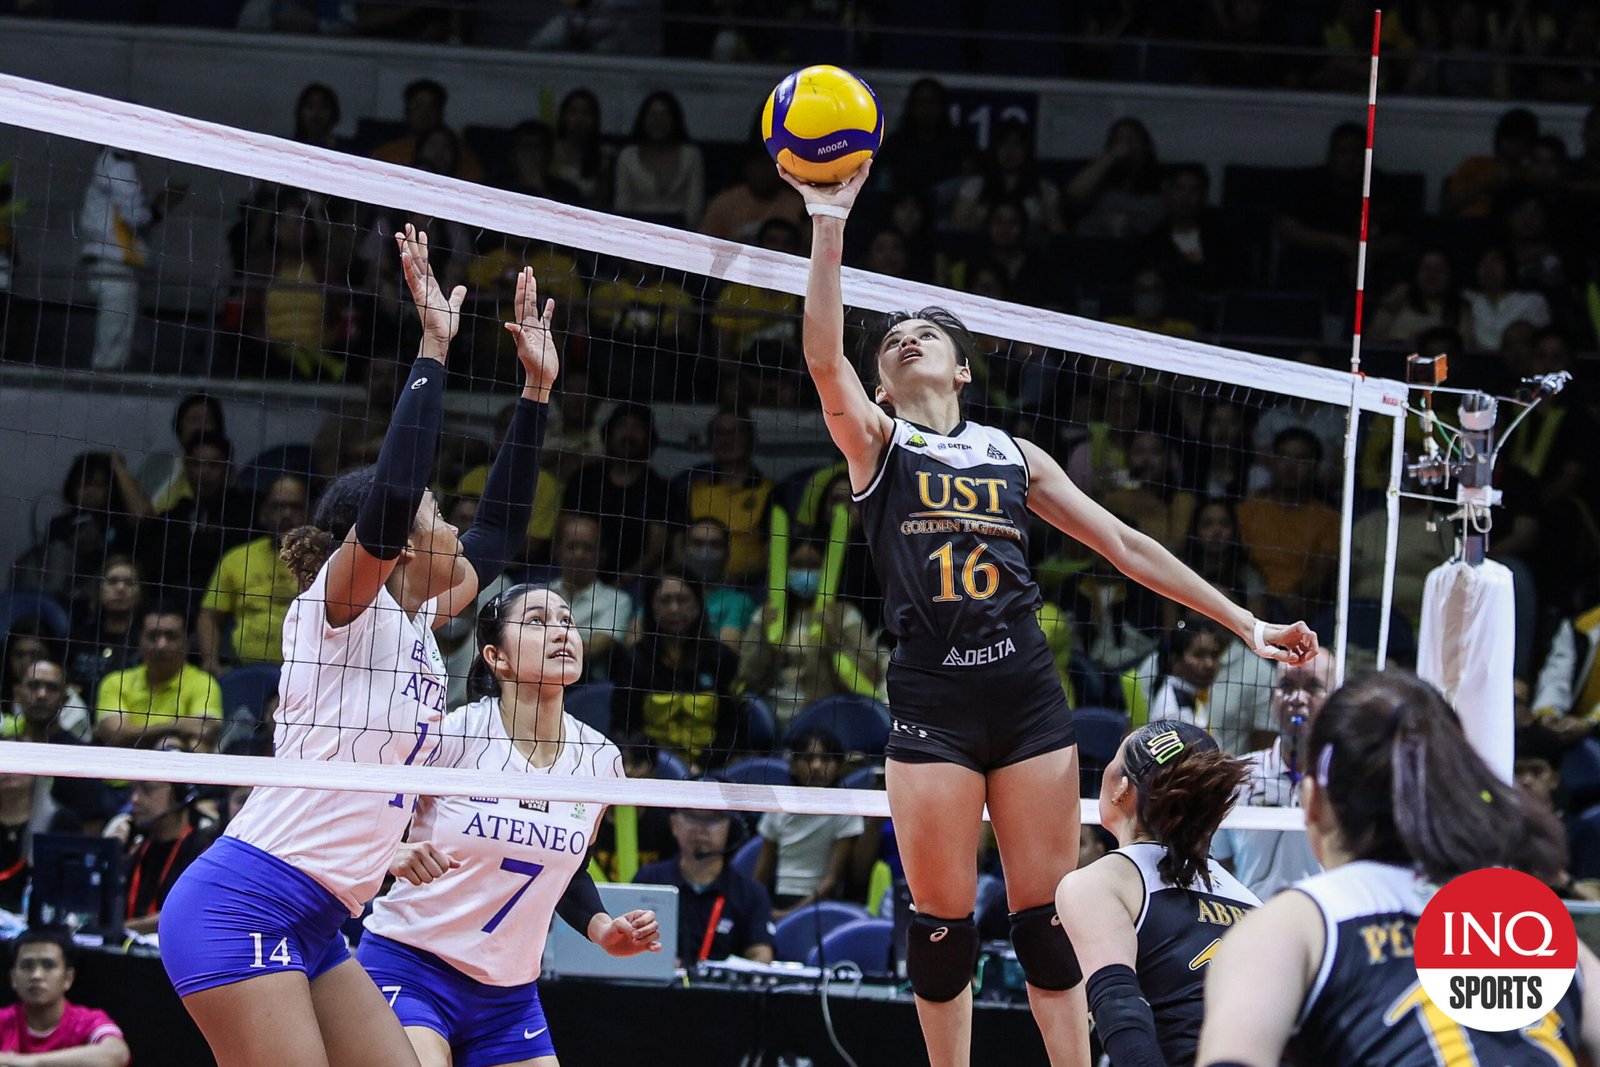 Cassie Carballo delivers when it matters most for UST